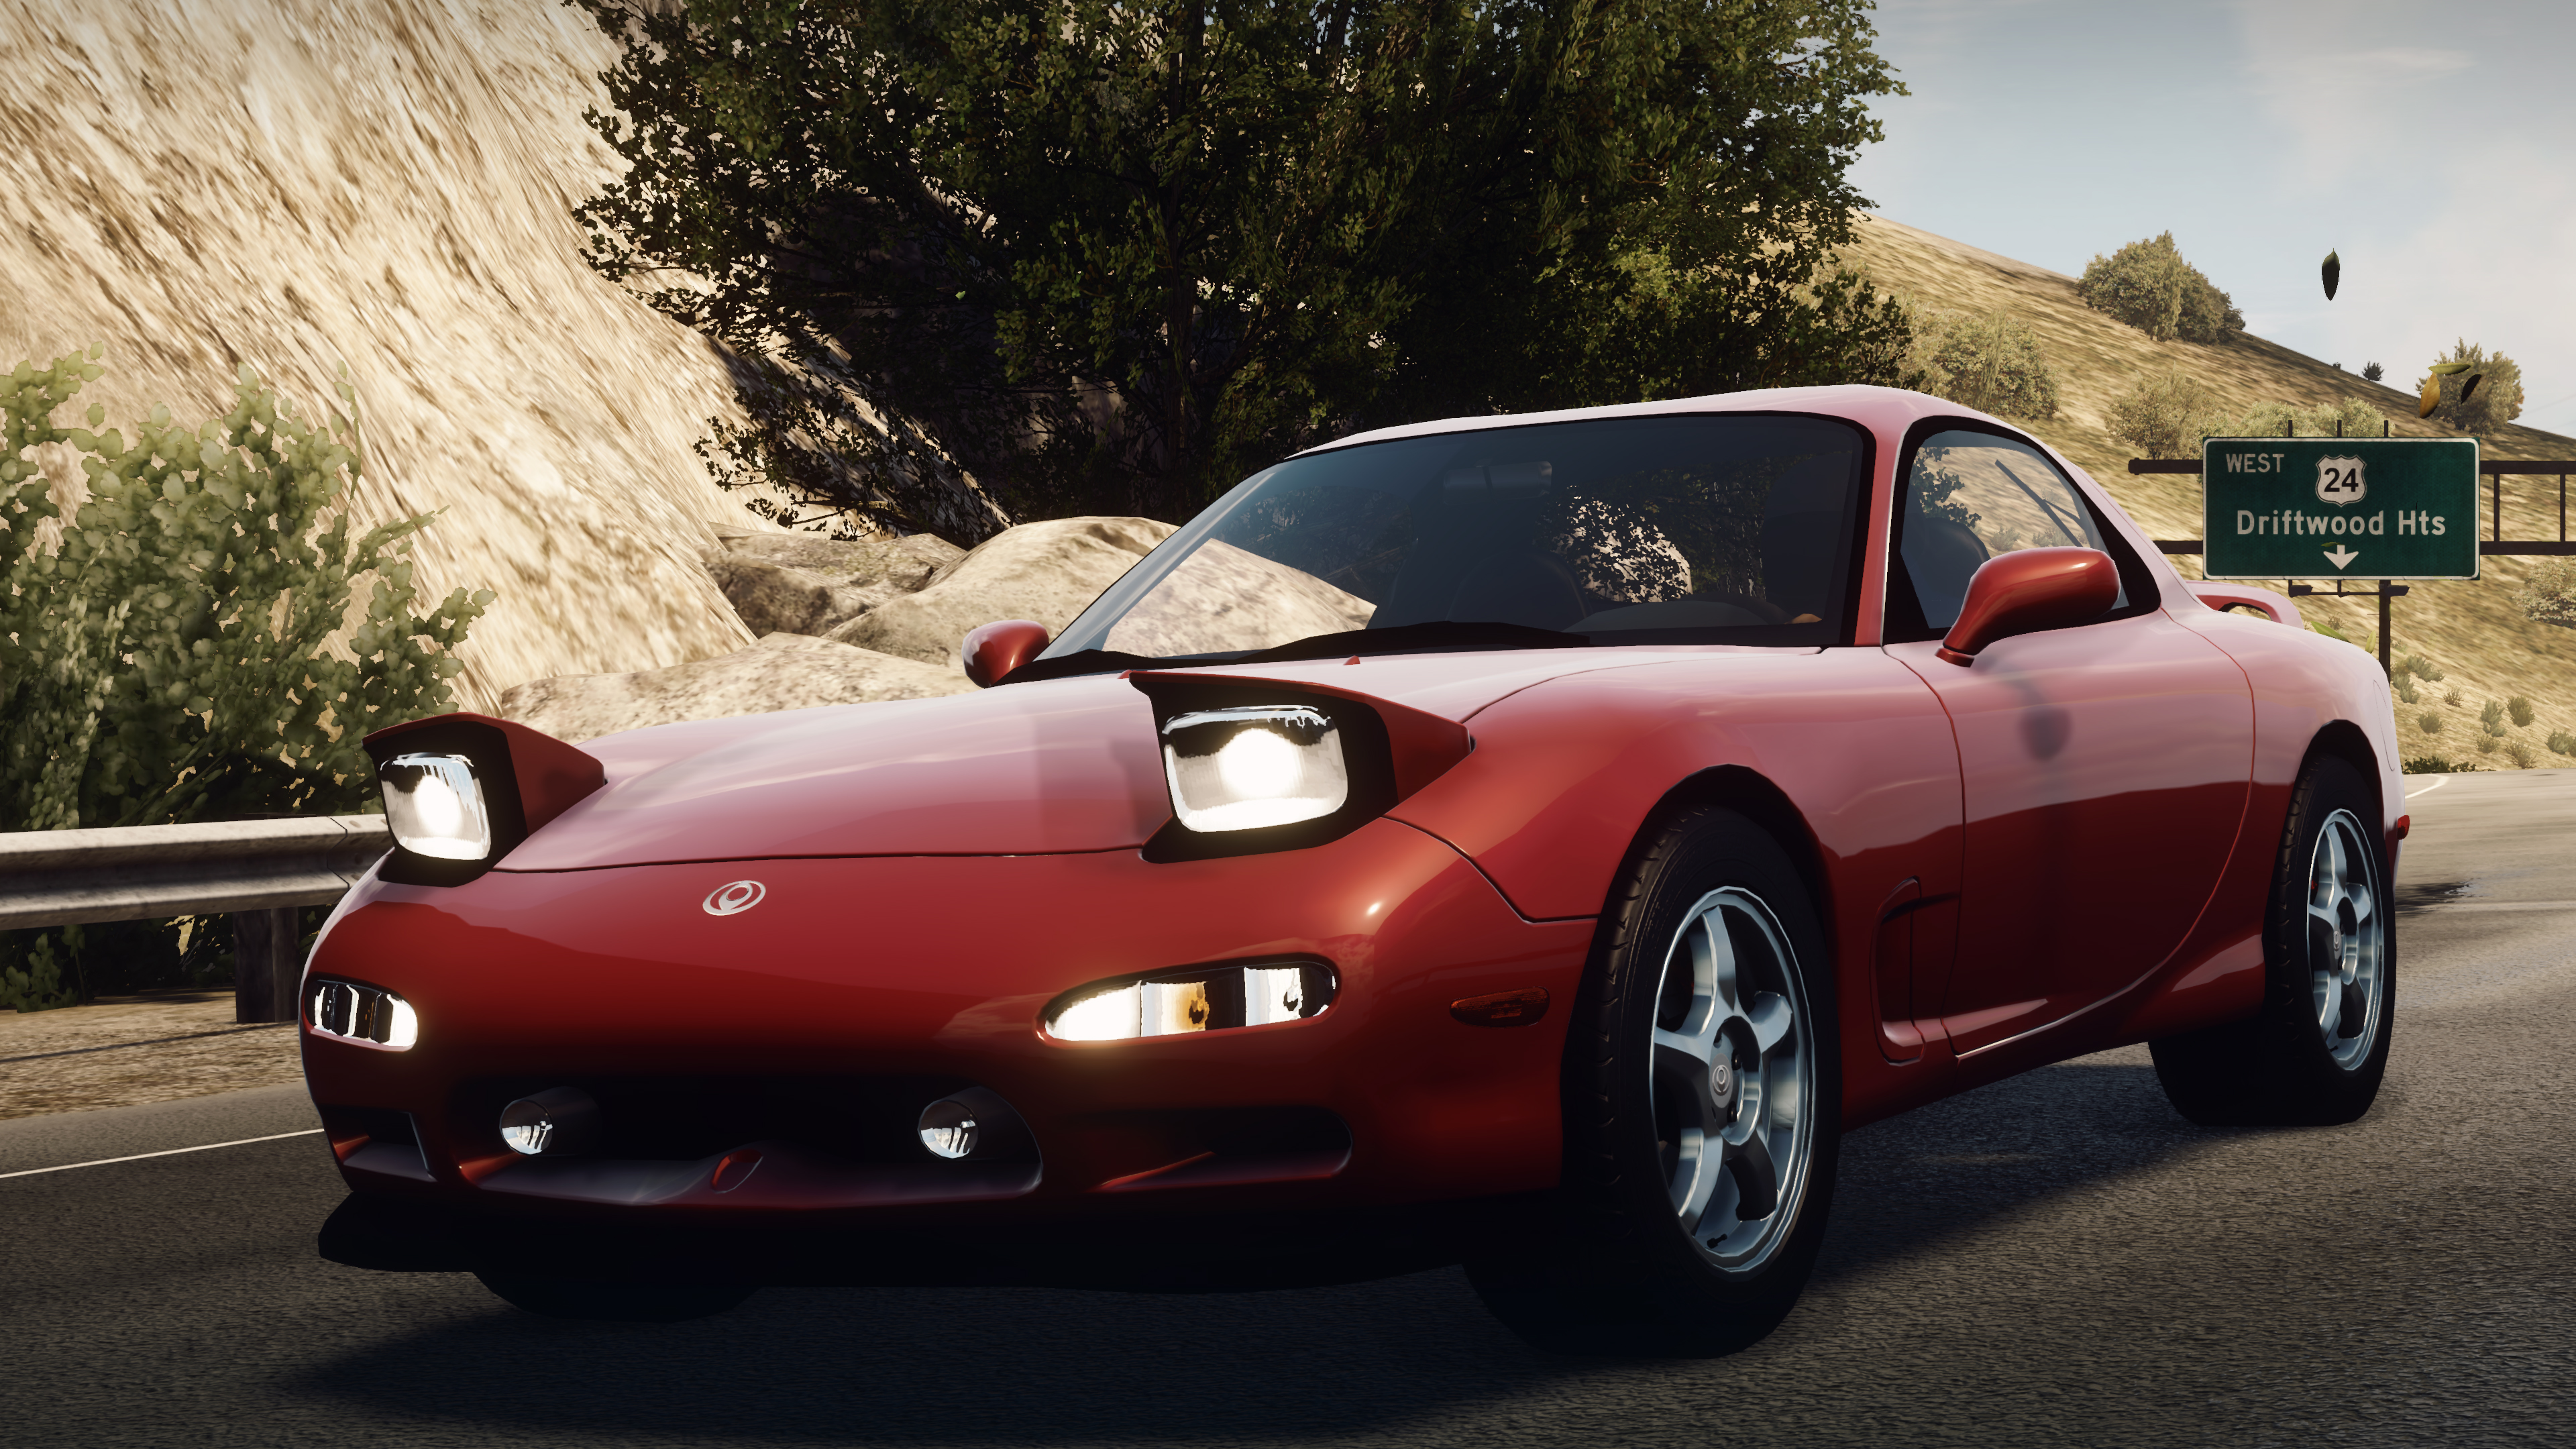 Mazda RX-7 (FD) (Series 6), Need for Speed Wiki